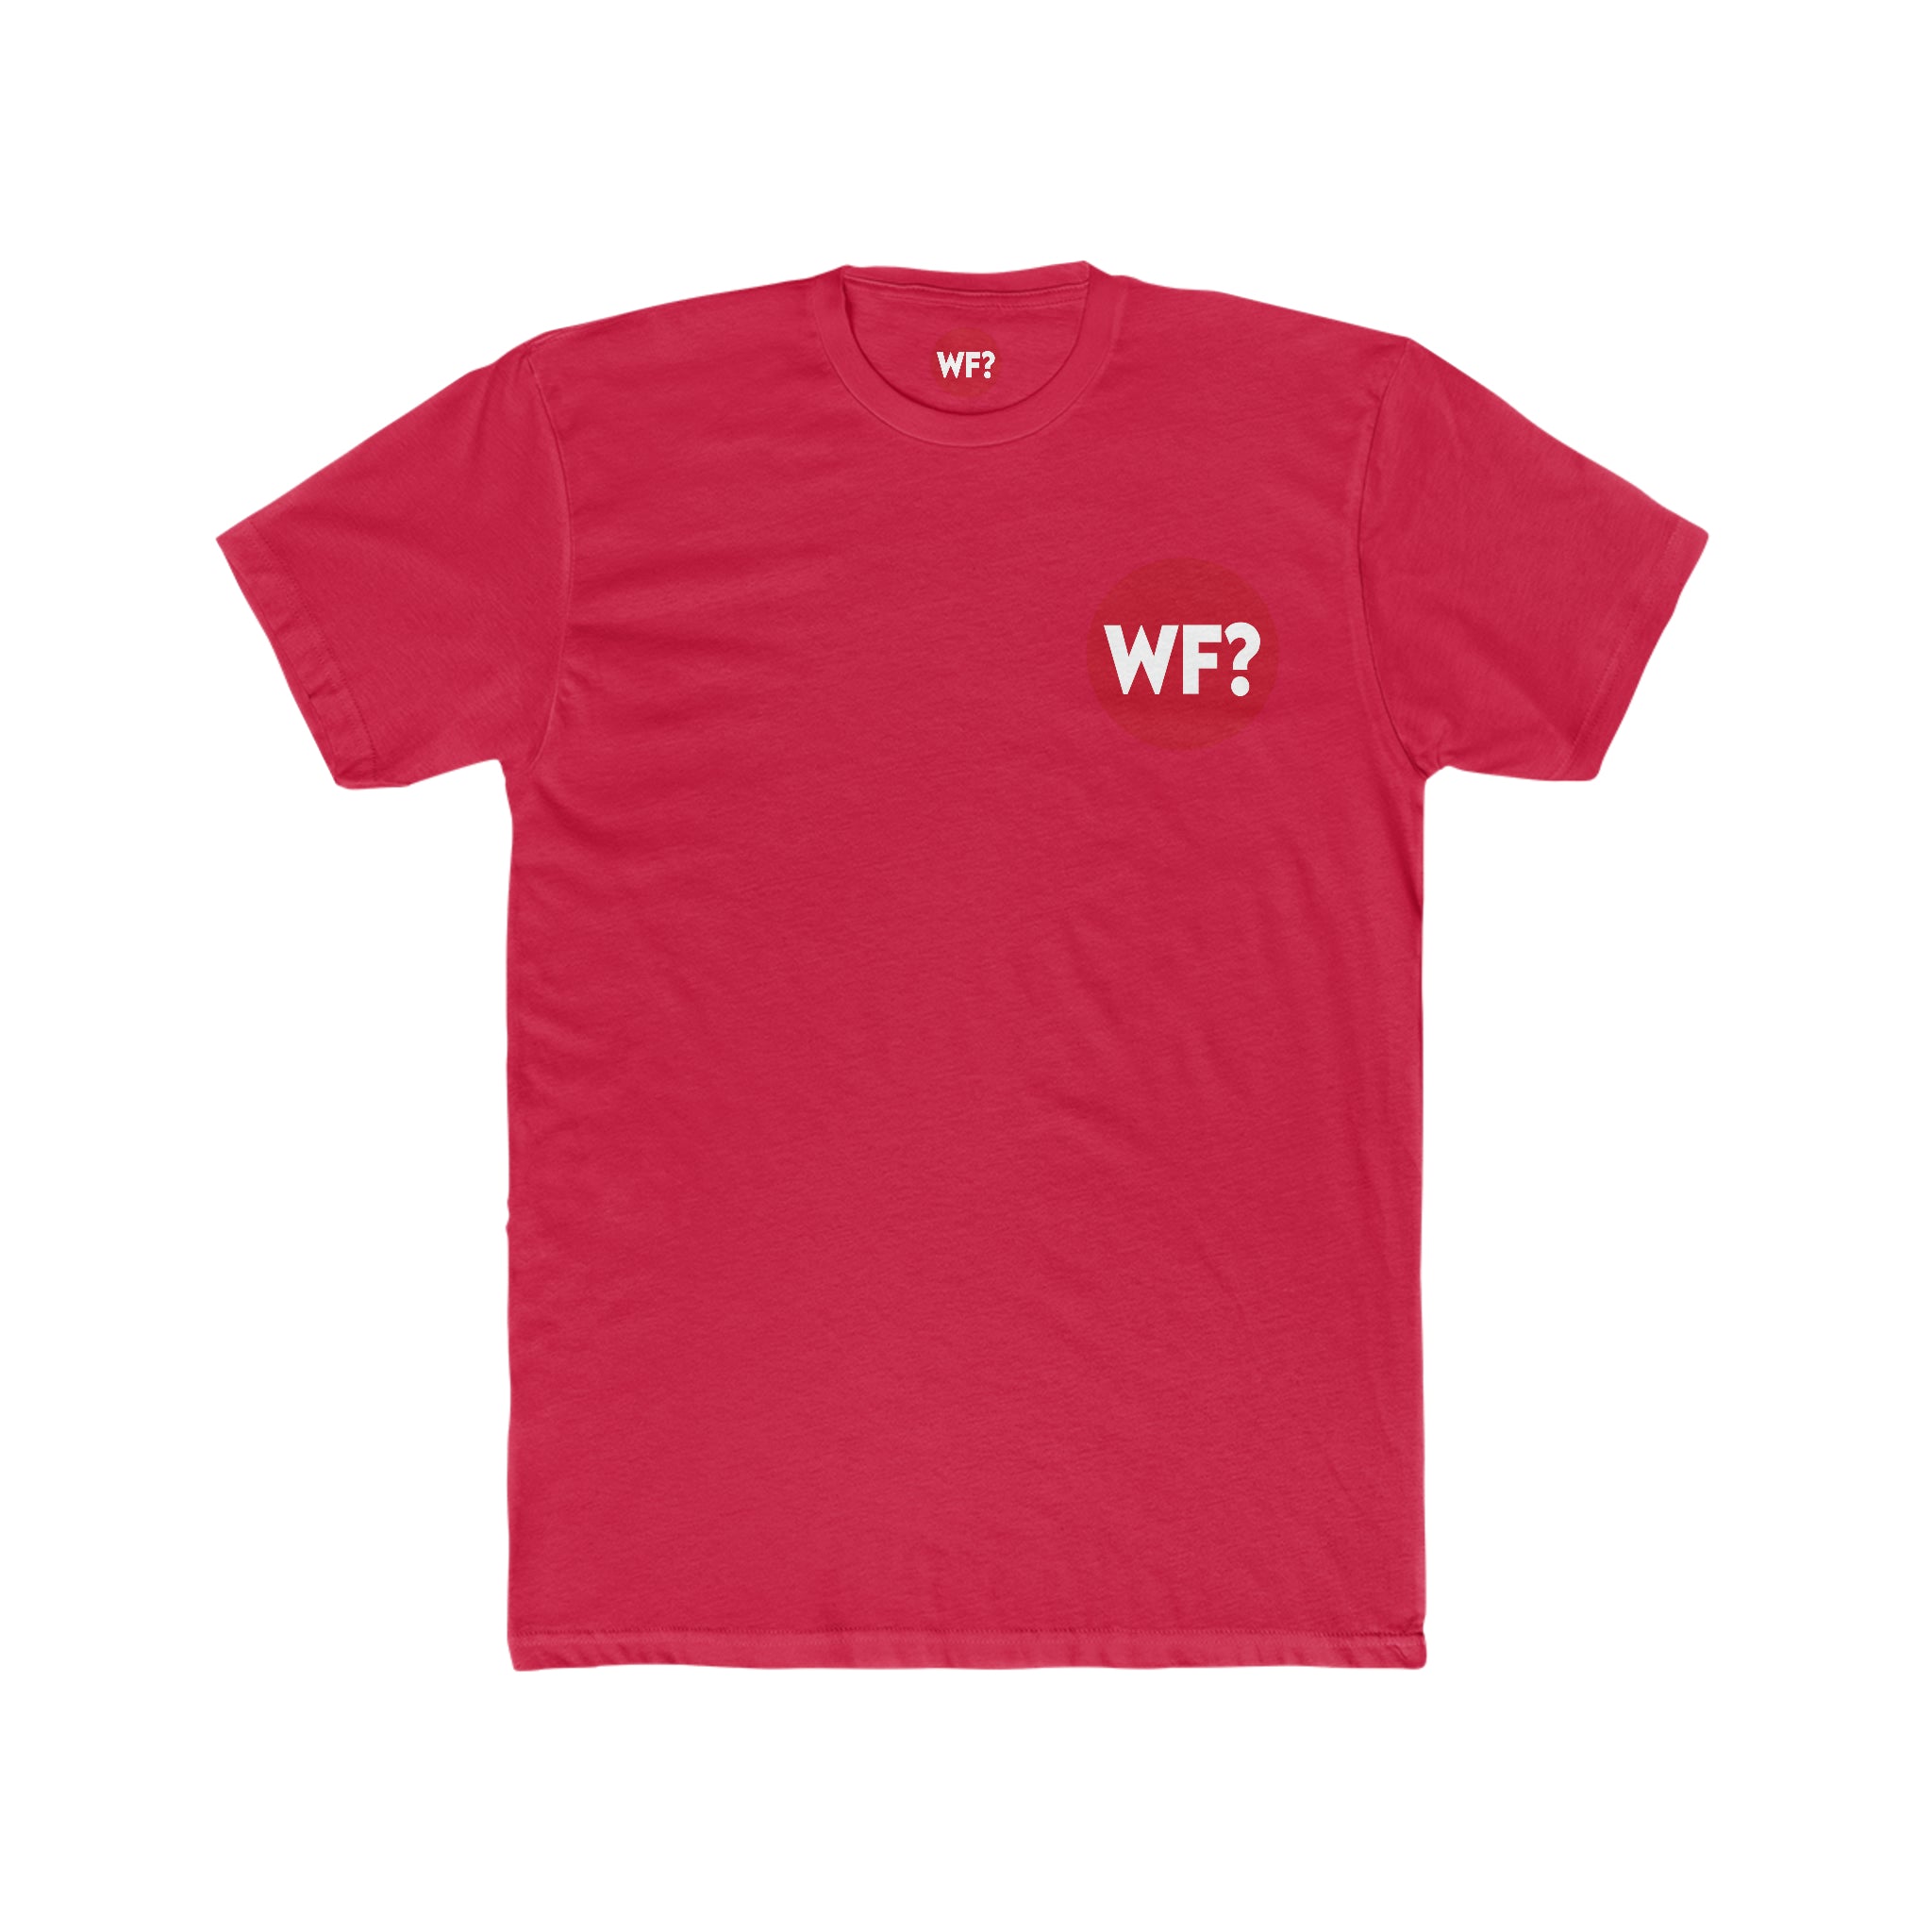 Buy solid-red Hecklefish on the Back Cotton Crew Tee